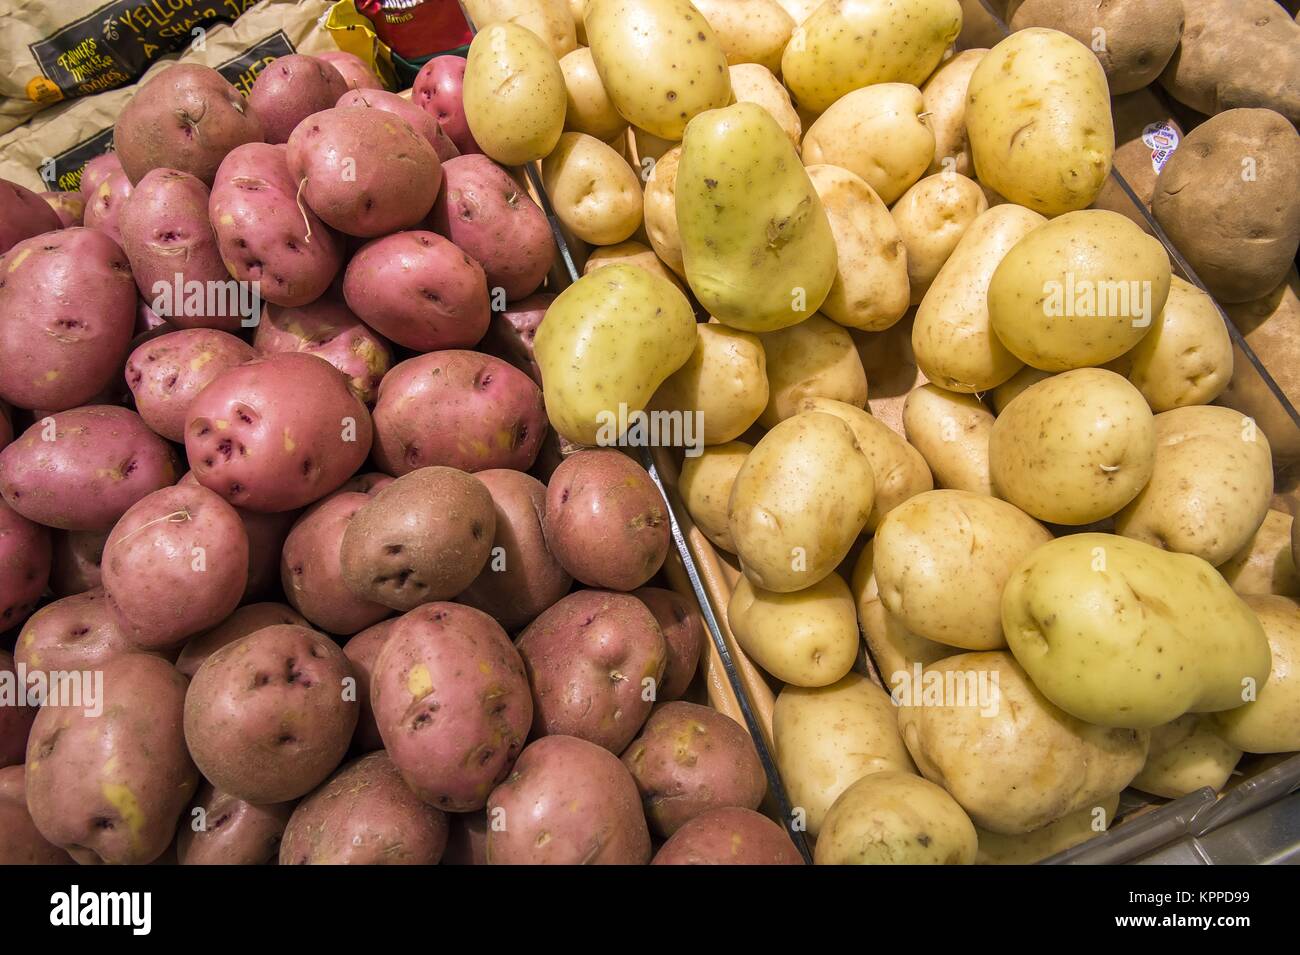 harvested potato tubers different varieties from market shelves Stock Photo